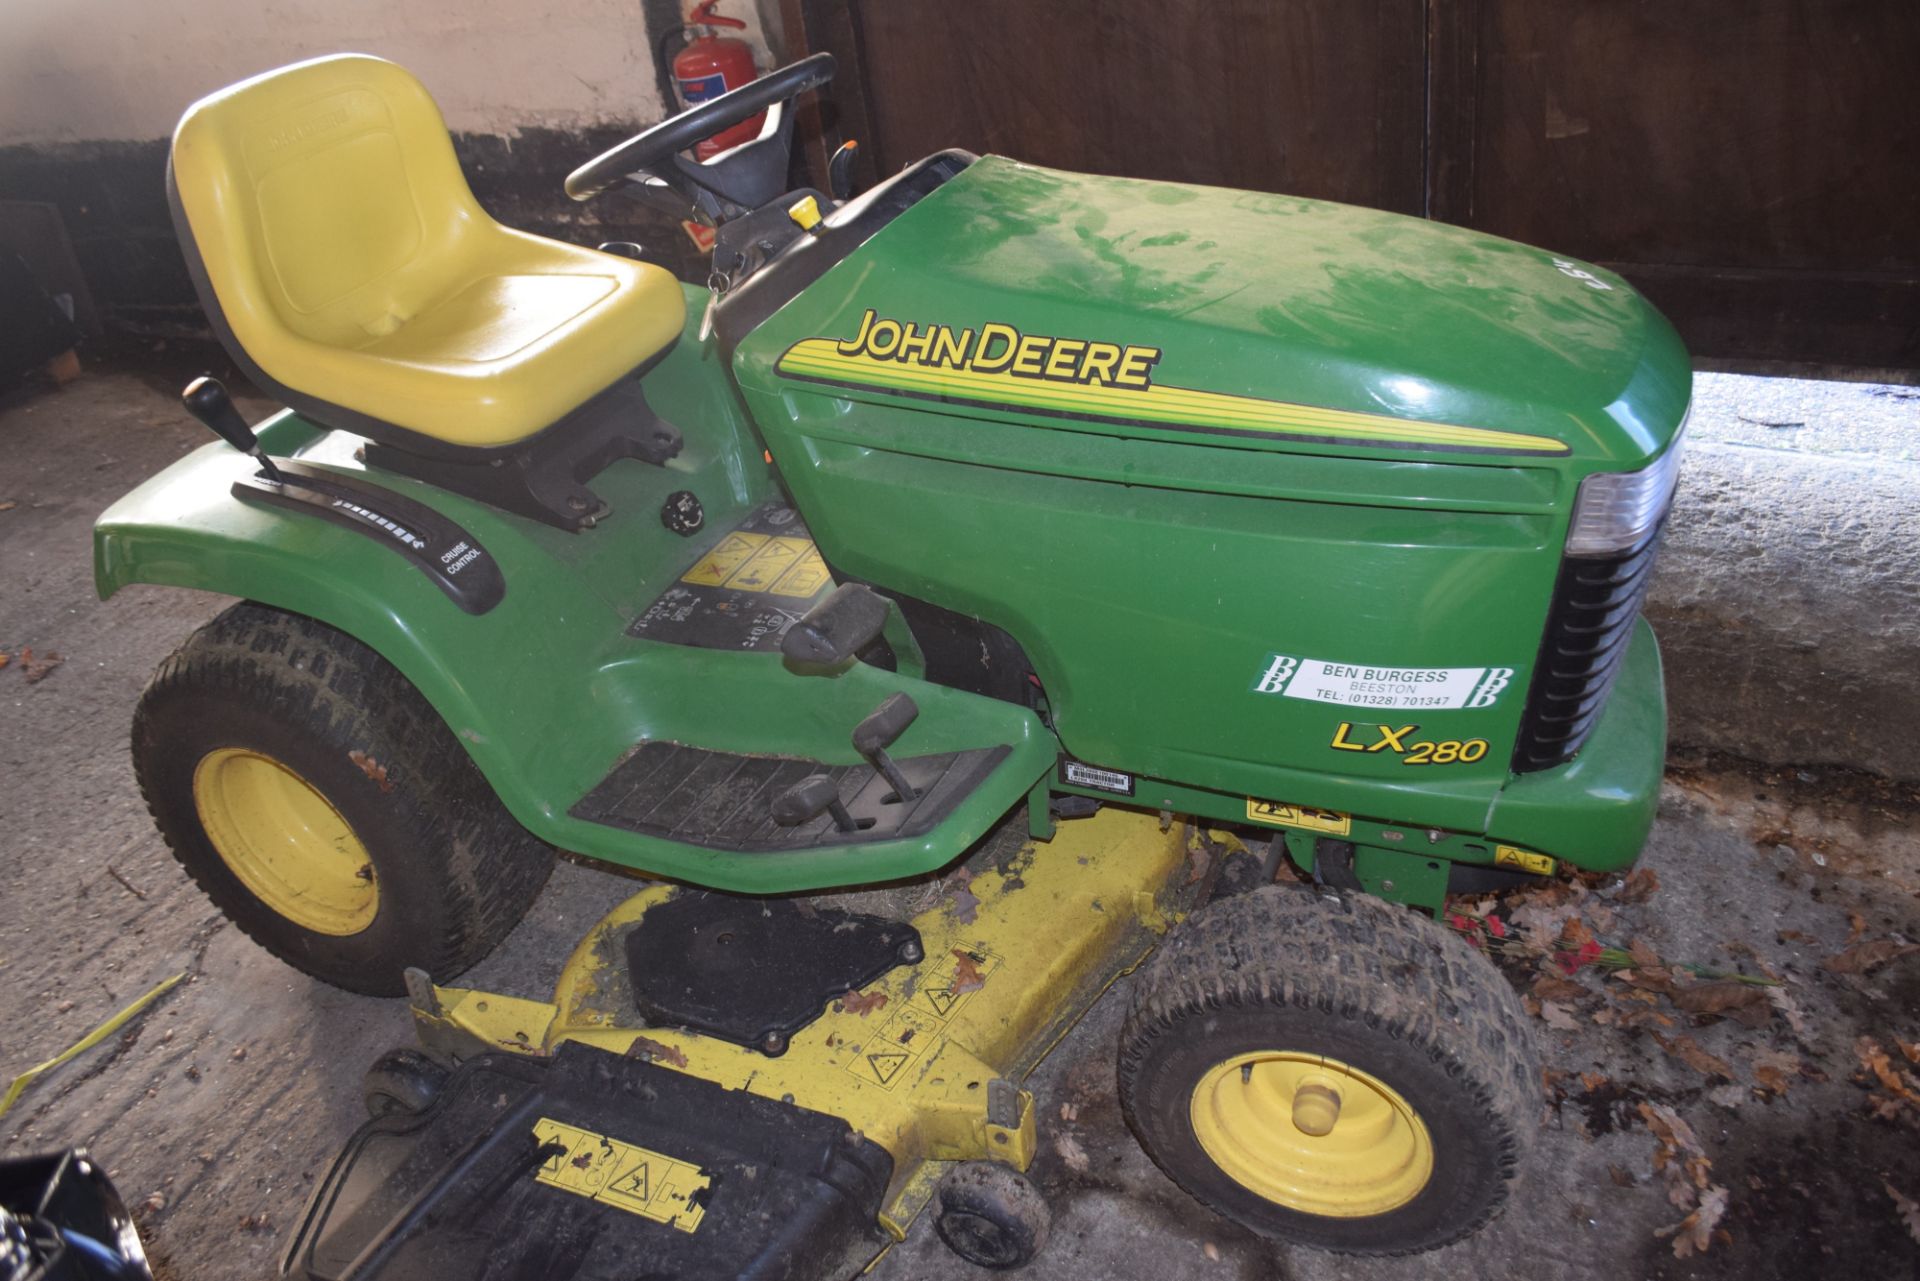 John Deere LX280 lawn tractor hours unknown - Image 2 of 2